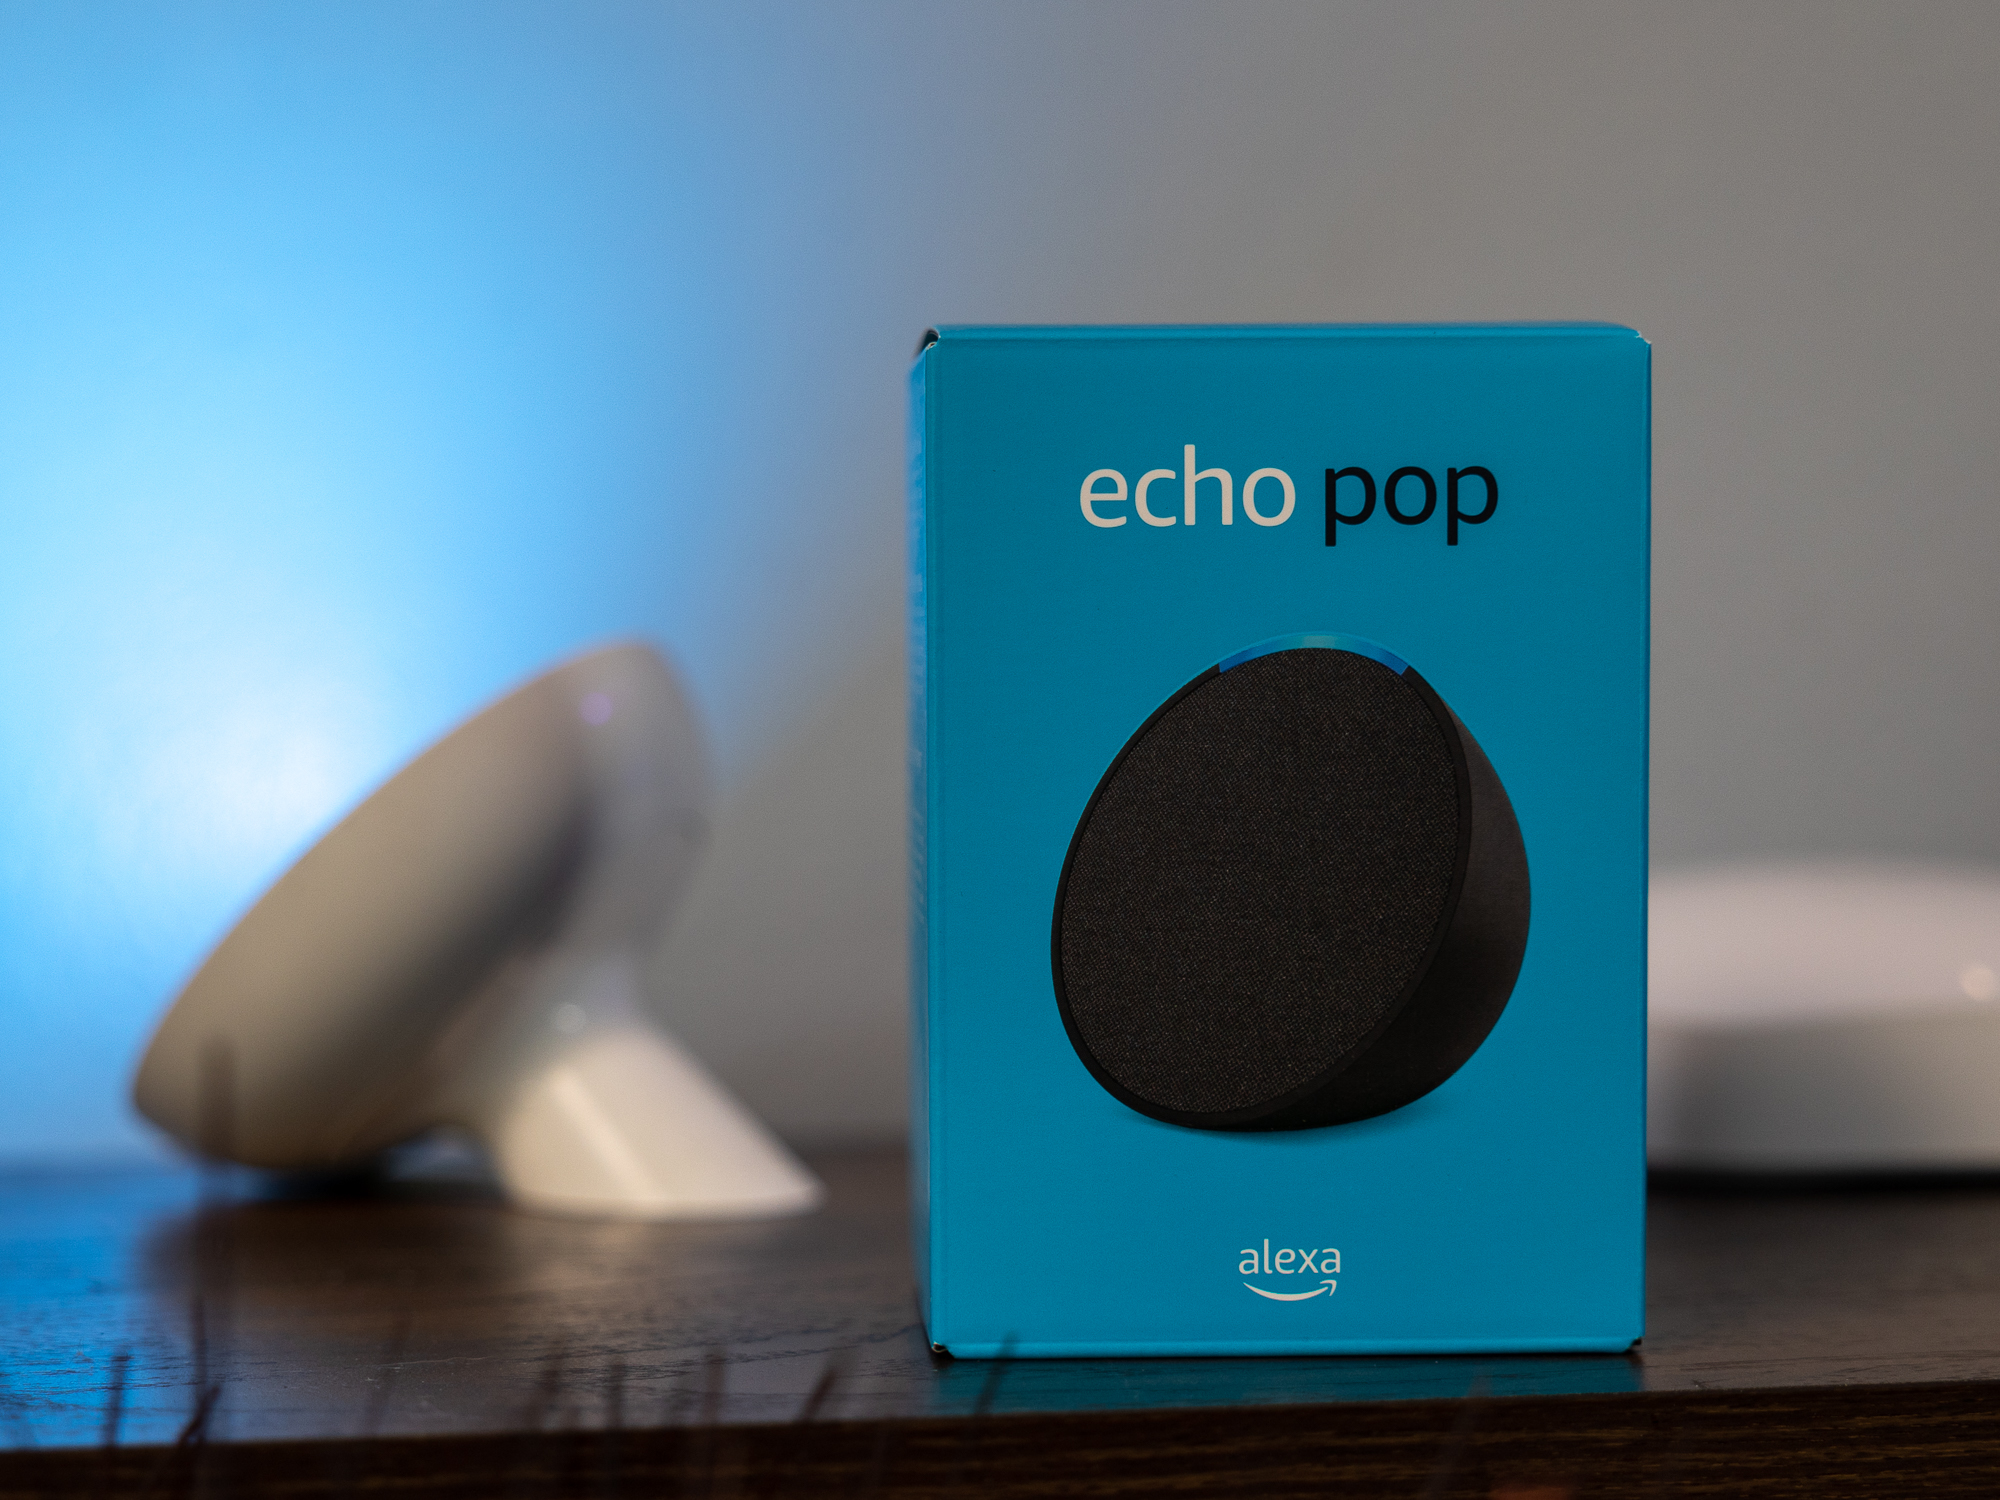 Echo Pop review: A portable smart speaker for small spaces